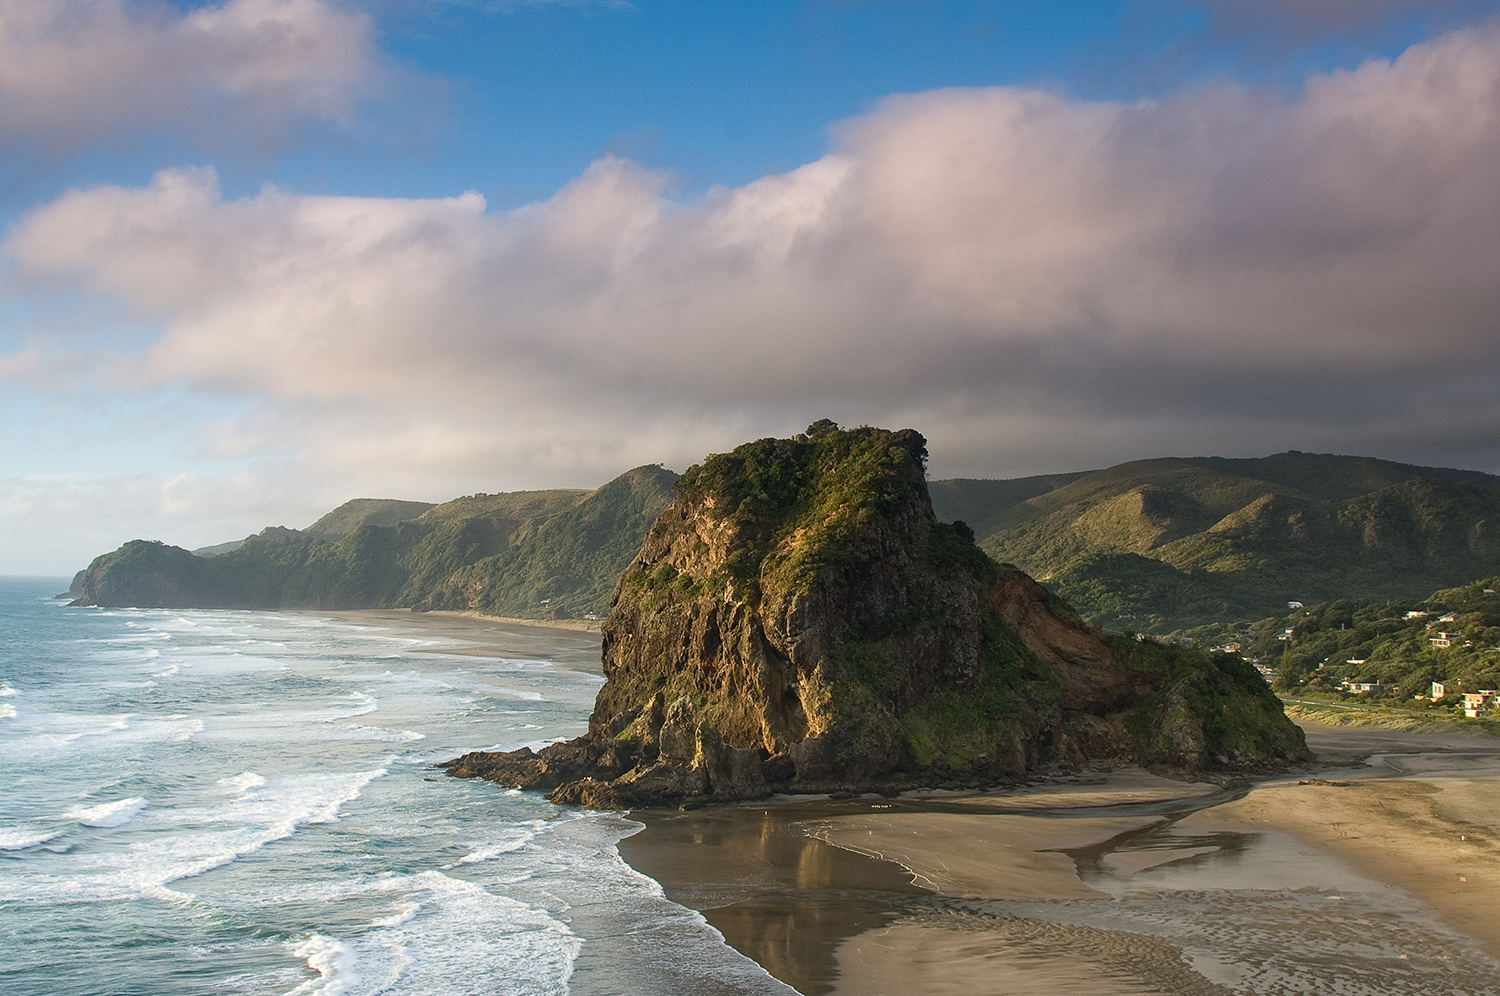 Frothing waves and craggy headlands, like Lion Rock, conspire to make Piha Beach one of New Zealand's most rugged shores. Image by russellstreet / CC BY-SA 2.0